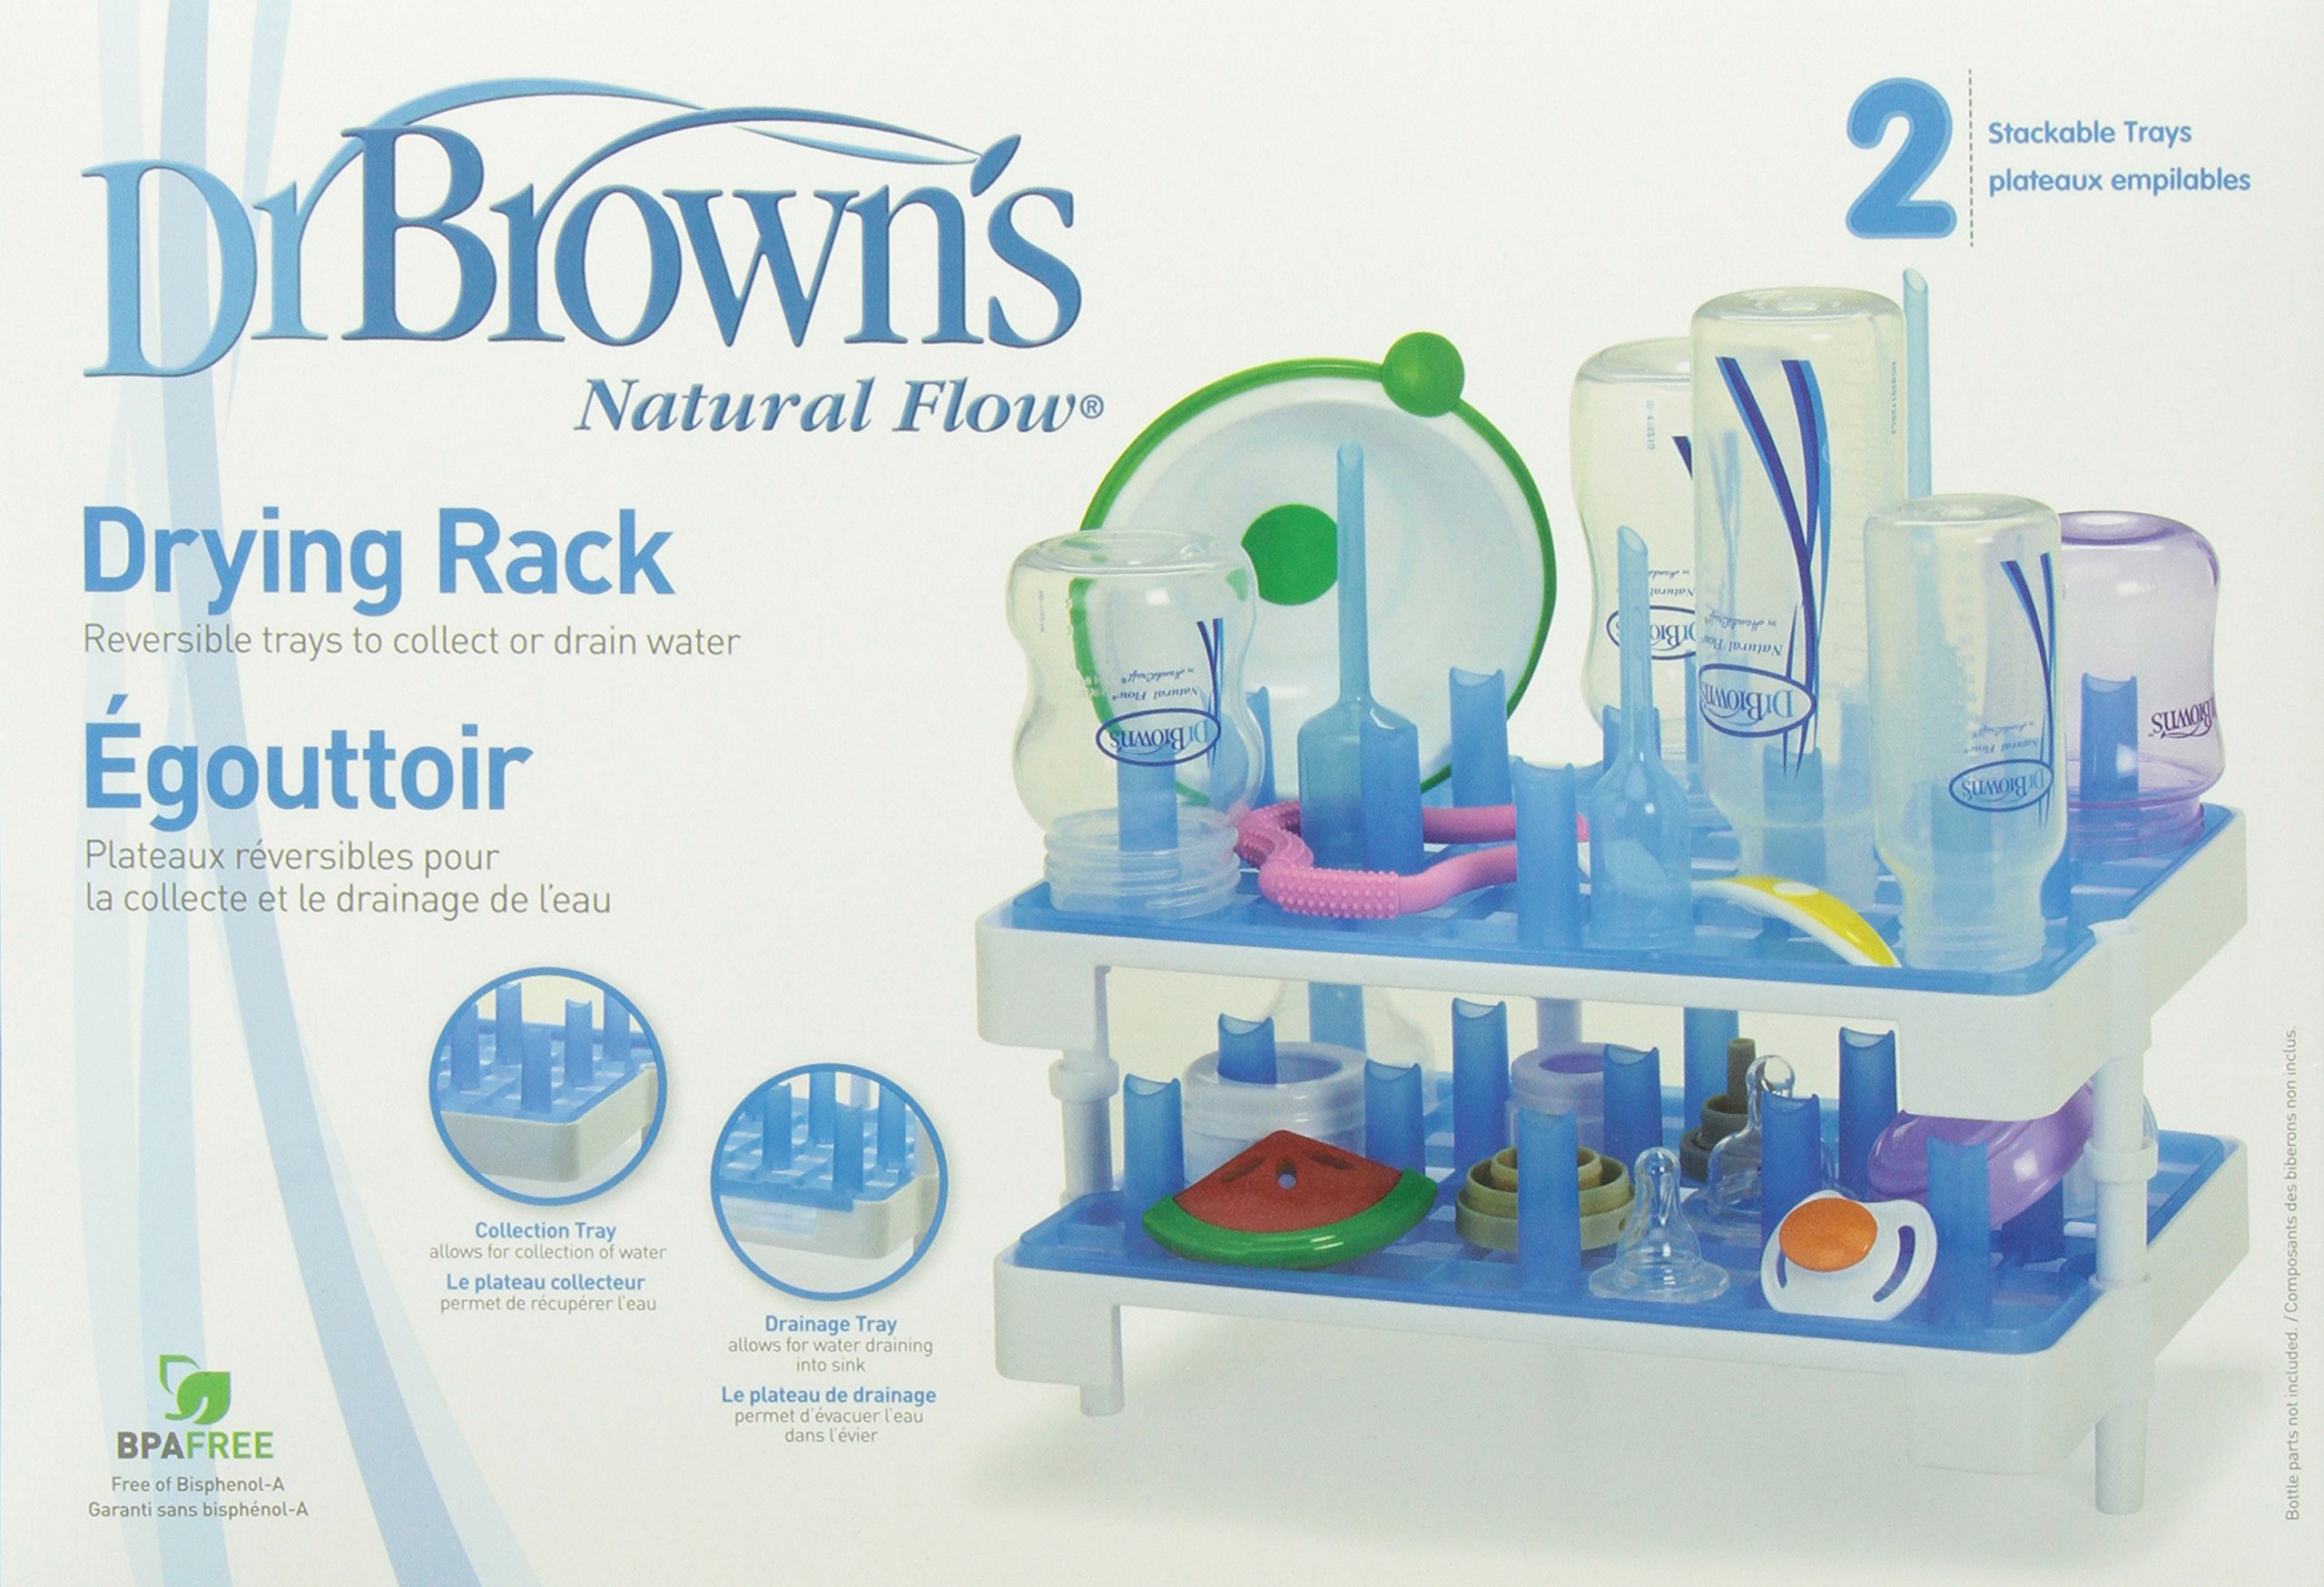 Dr. Brown's Drying Rack